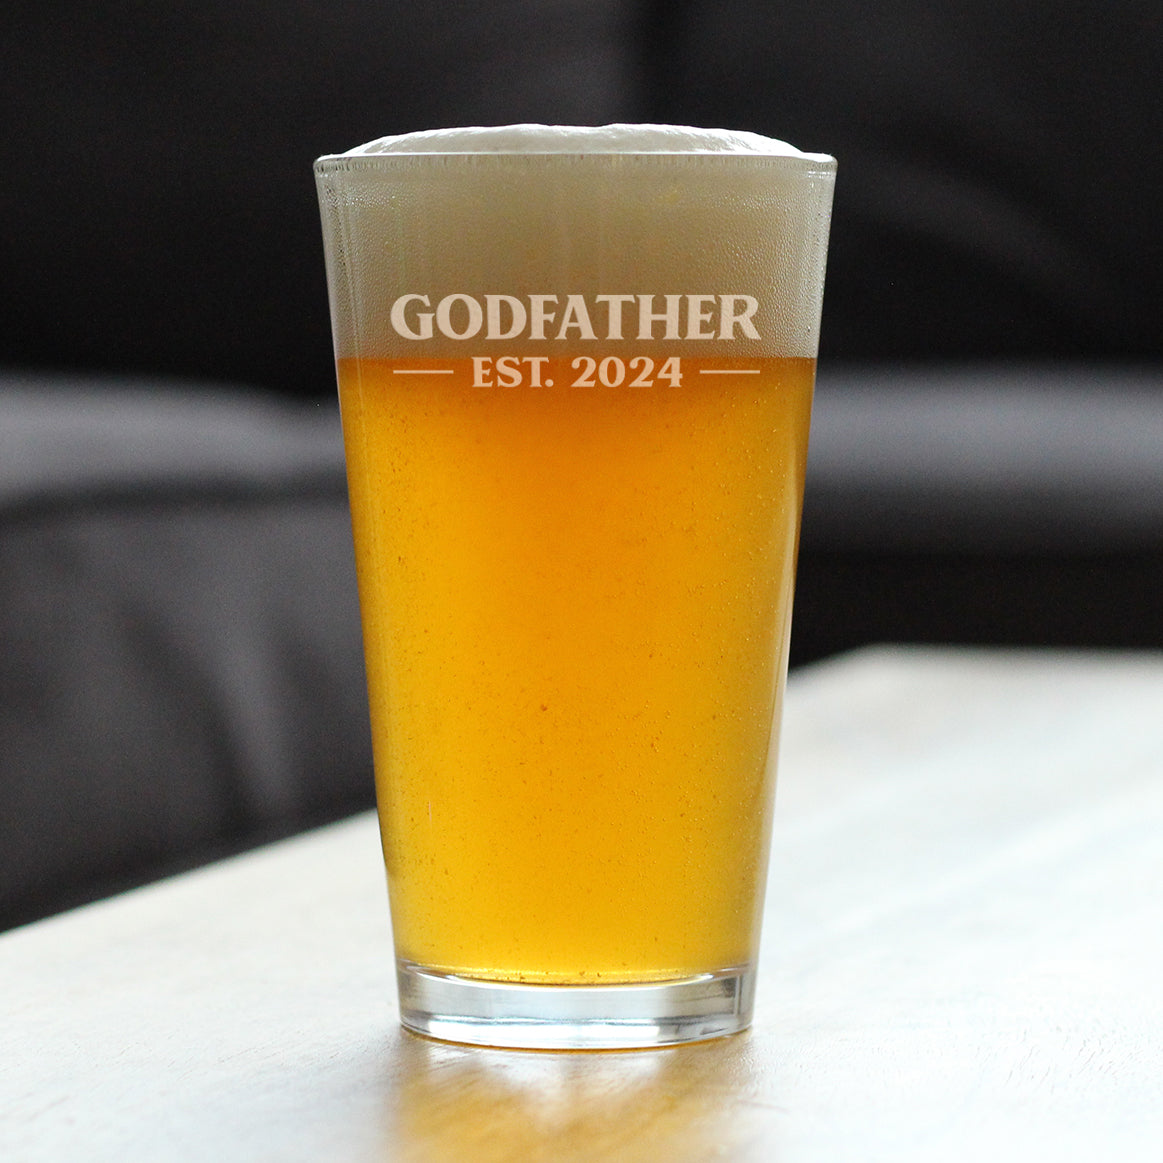 Godfather Est 2024 - New Godfather Pint Glass Proposal Gift for First Time Godparents - Bold 16 Oz Glasses